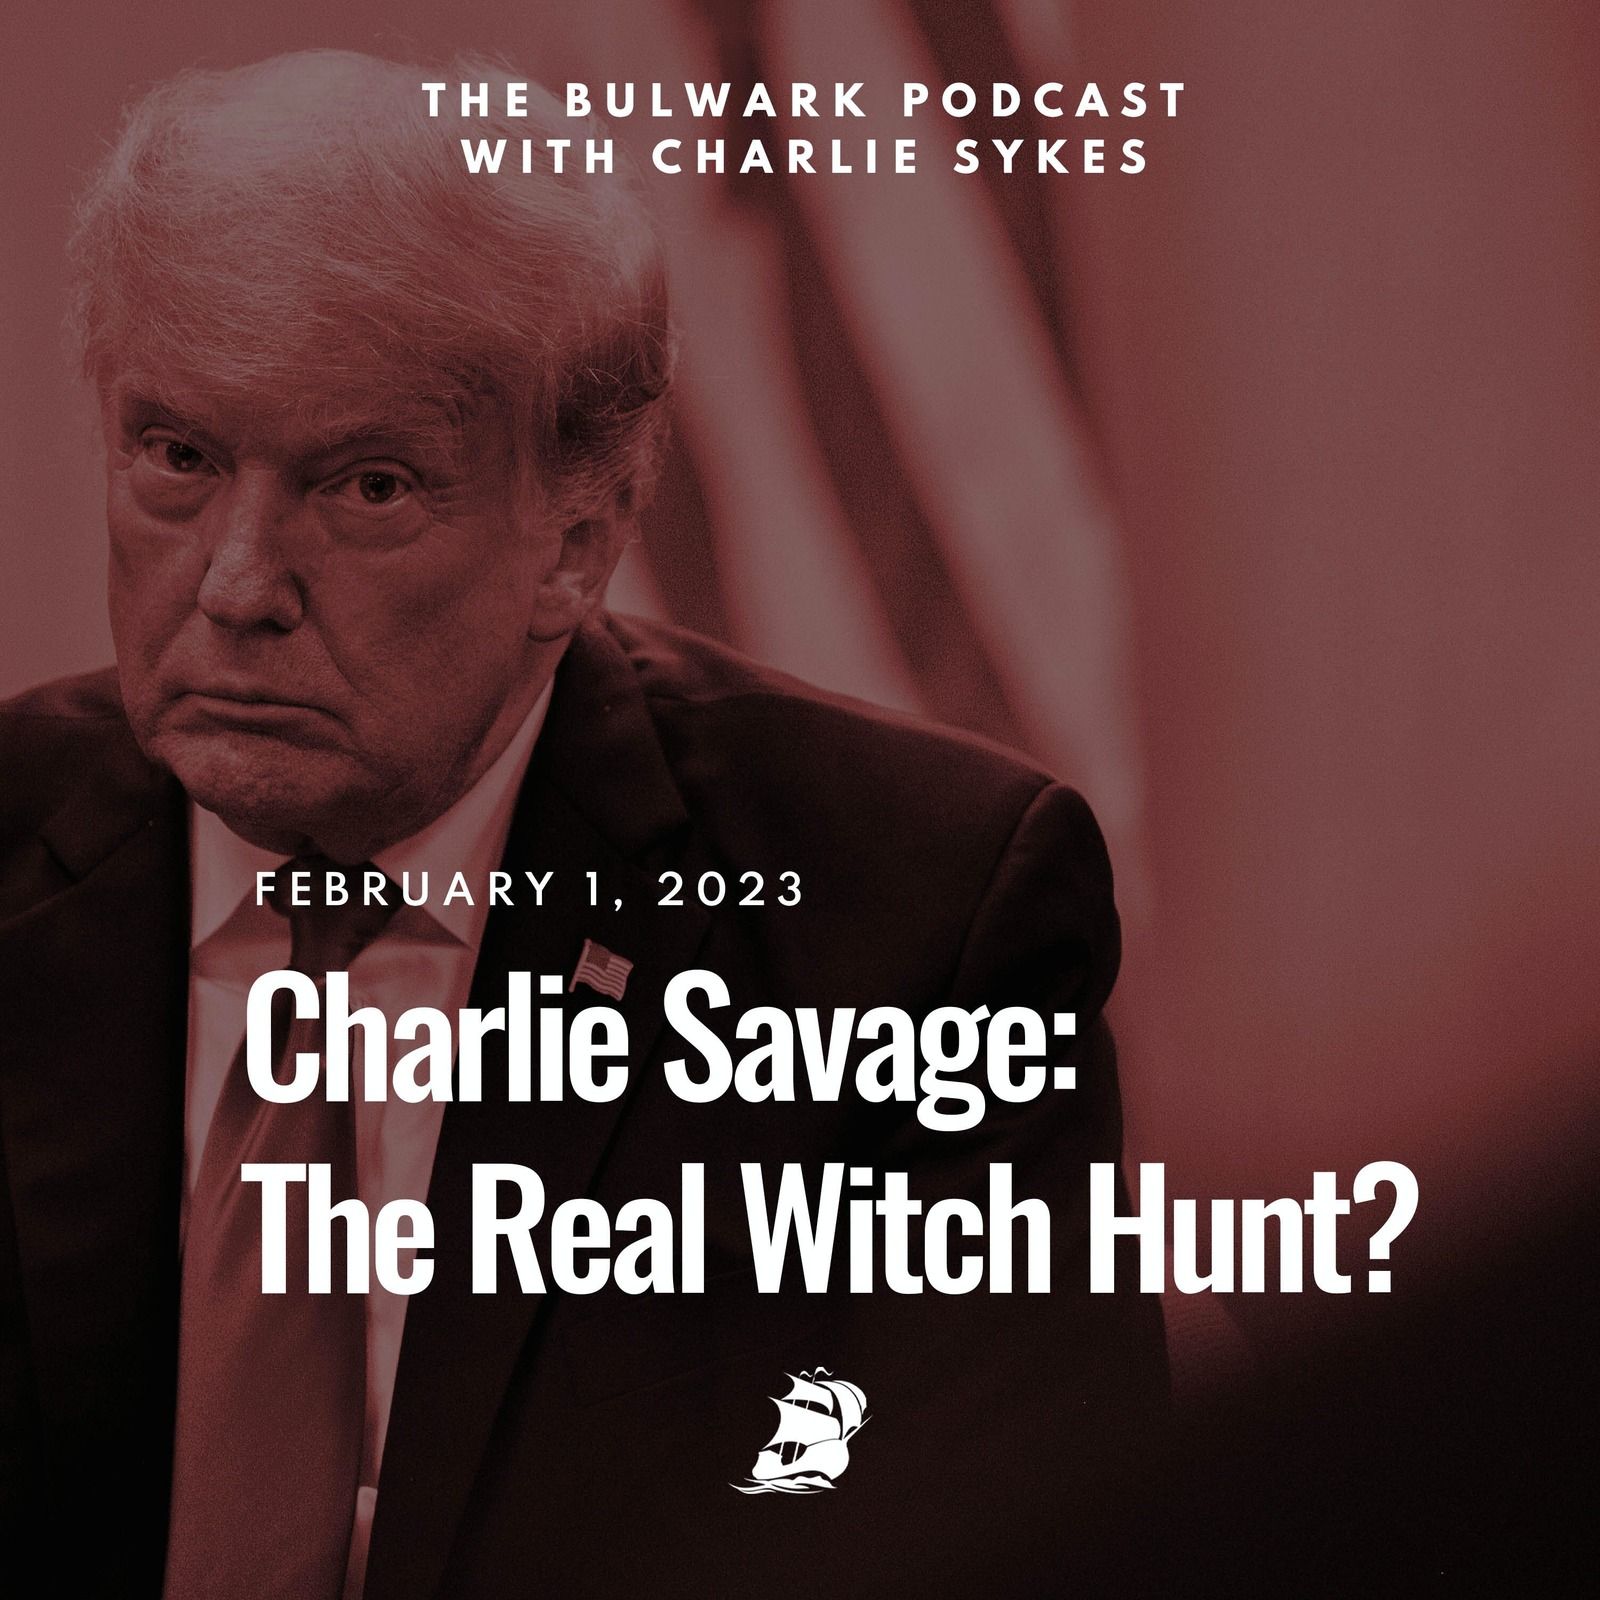 Charlie Savage: The Real Witch Hunt? by The Bulwark Podcast